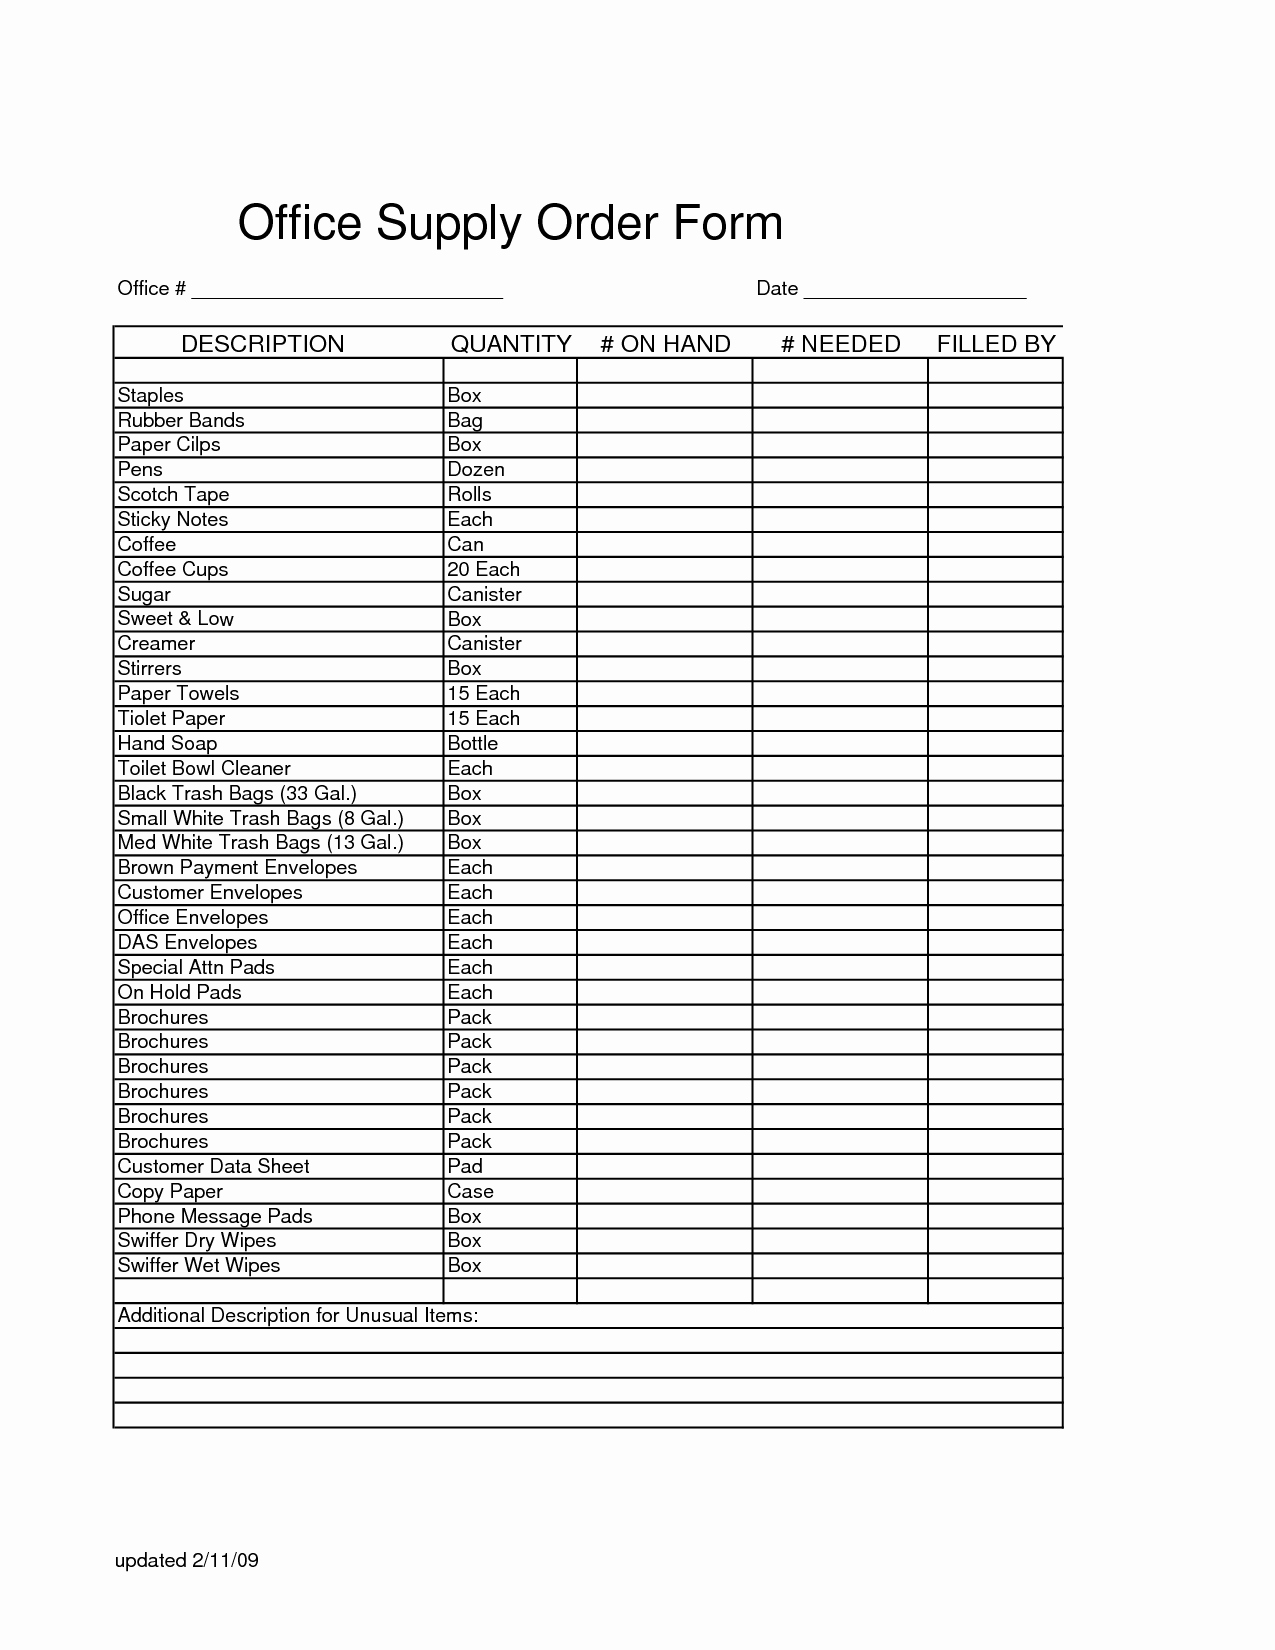 Office Supplies Request form New Fice Supply order form Template